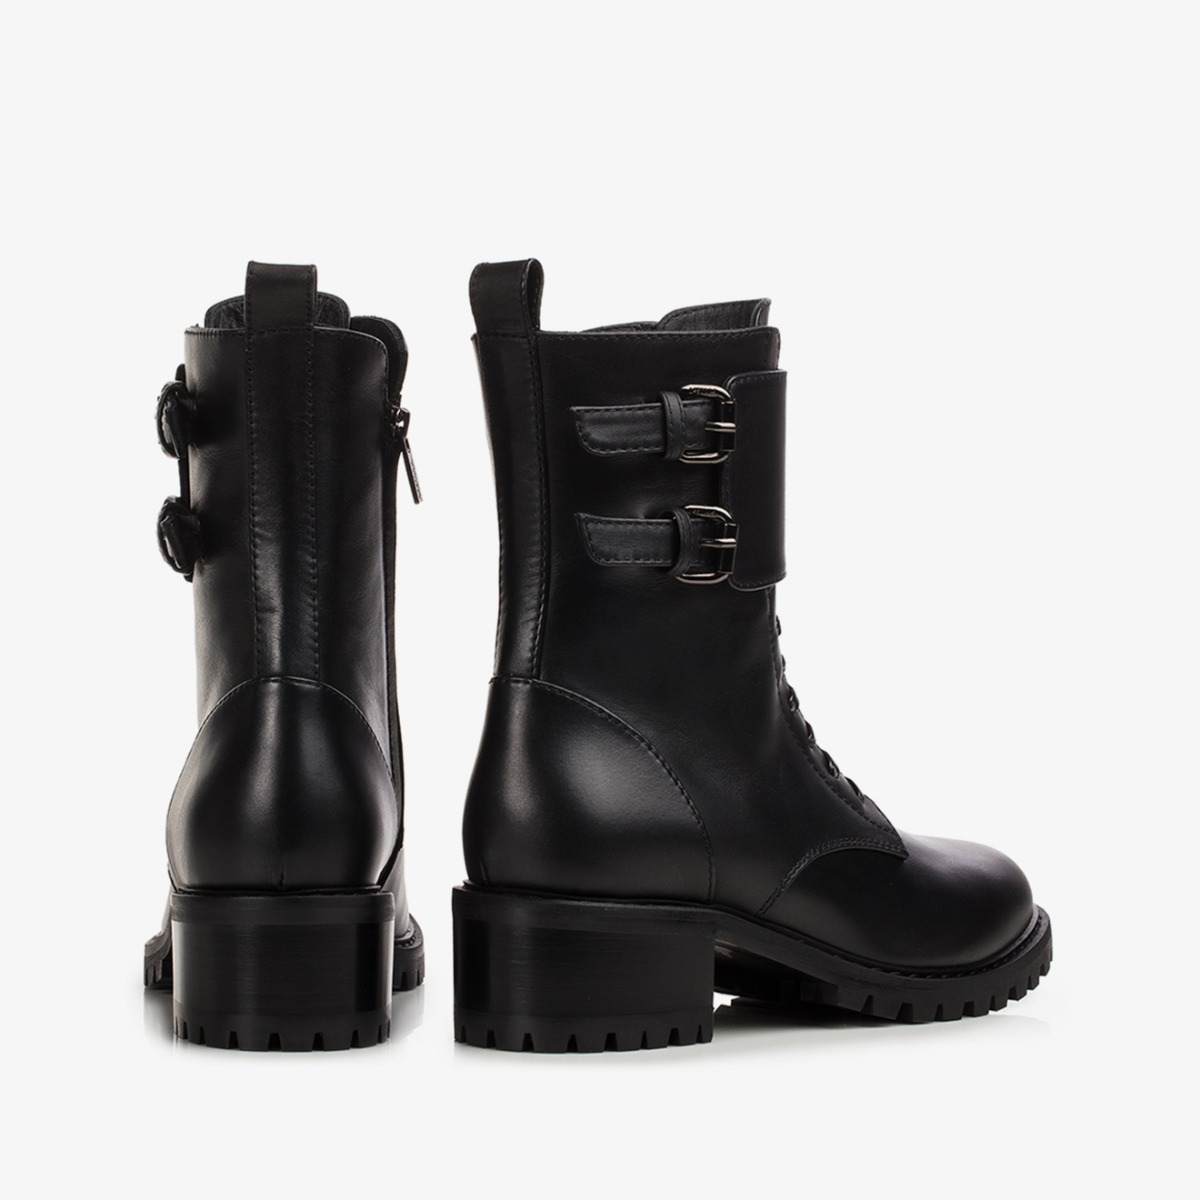 JESSI ANKLE BOOT 50 mm - Le Silla official outlet